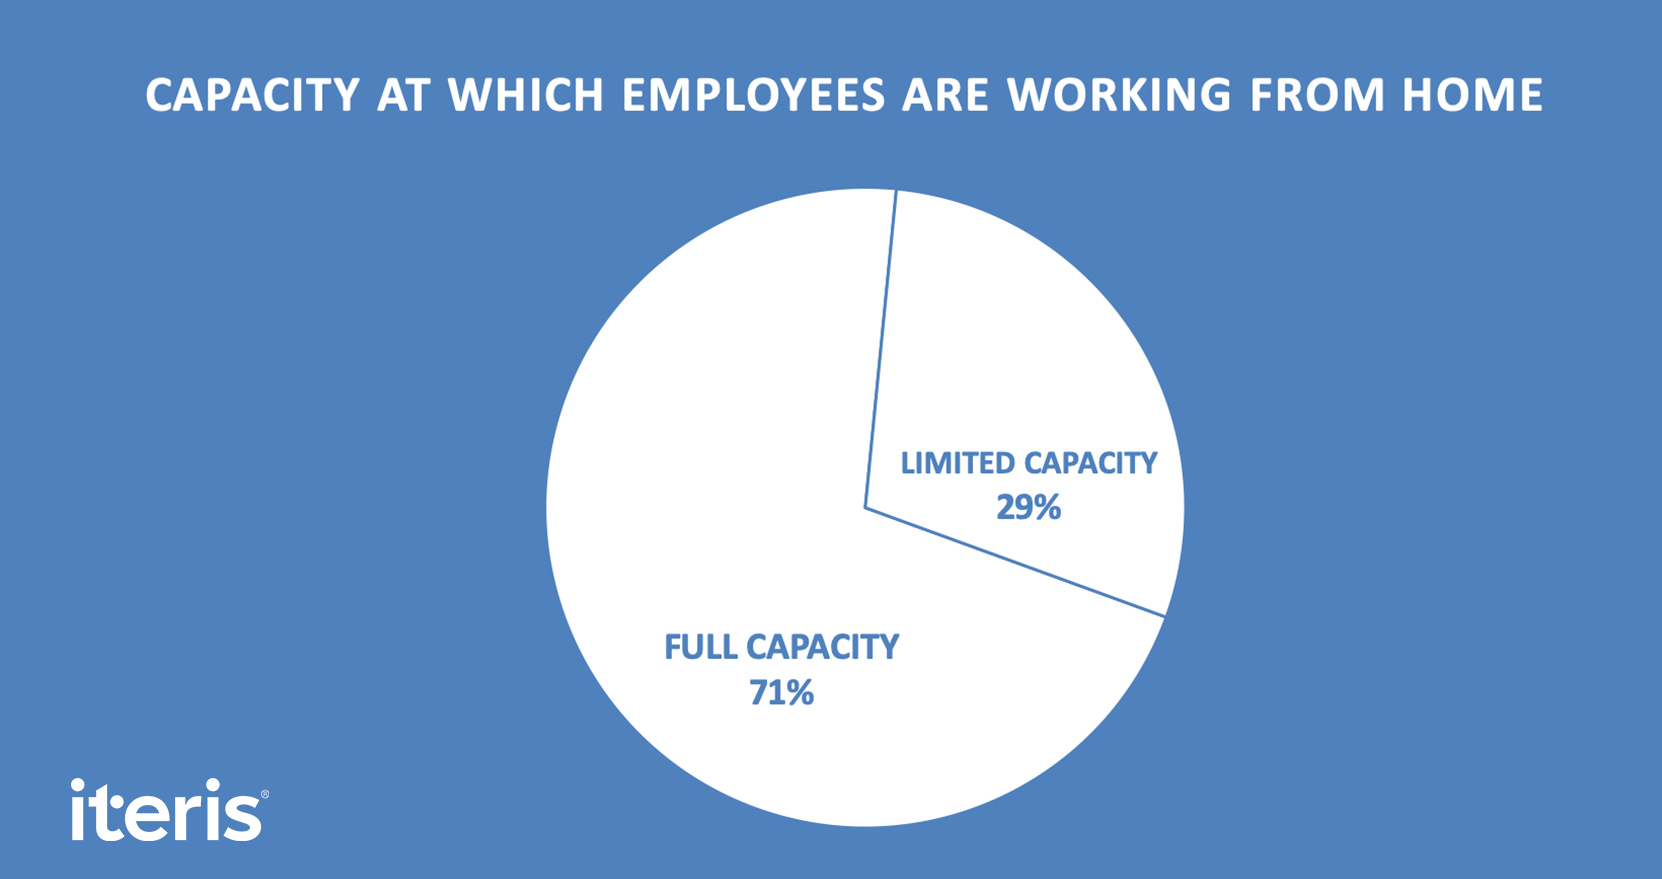 Capacity at which employees are working from home